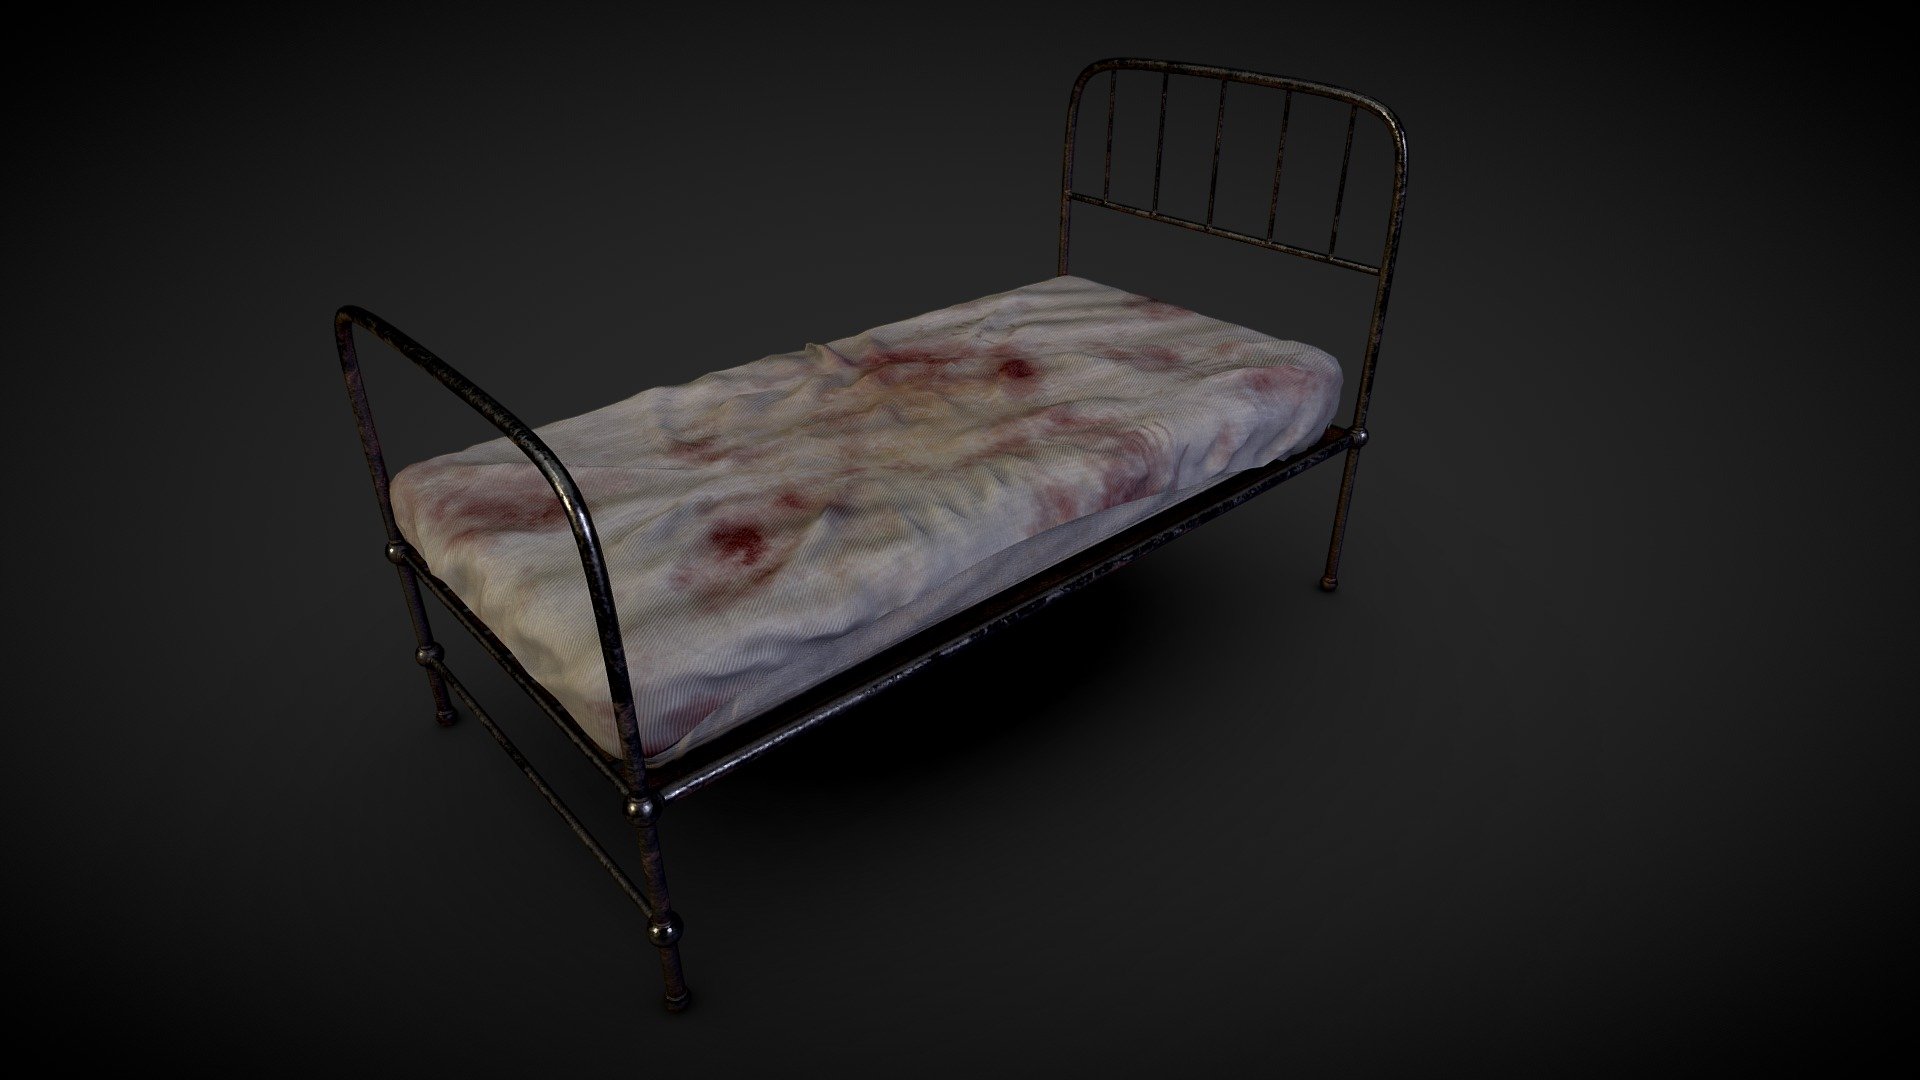 Game ready asset. All textures included ( 1024, 2048, 4096 )
I've made it for my video game project. 
Modeling in Maya, Sheets in Marvelous designer and Texturing in Substance Painter 3d model